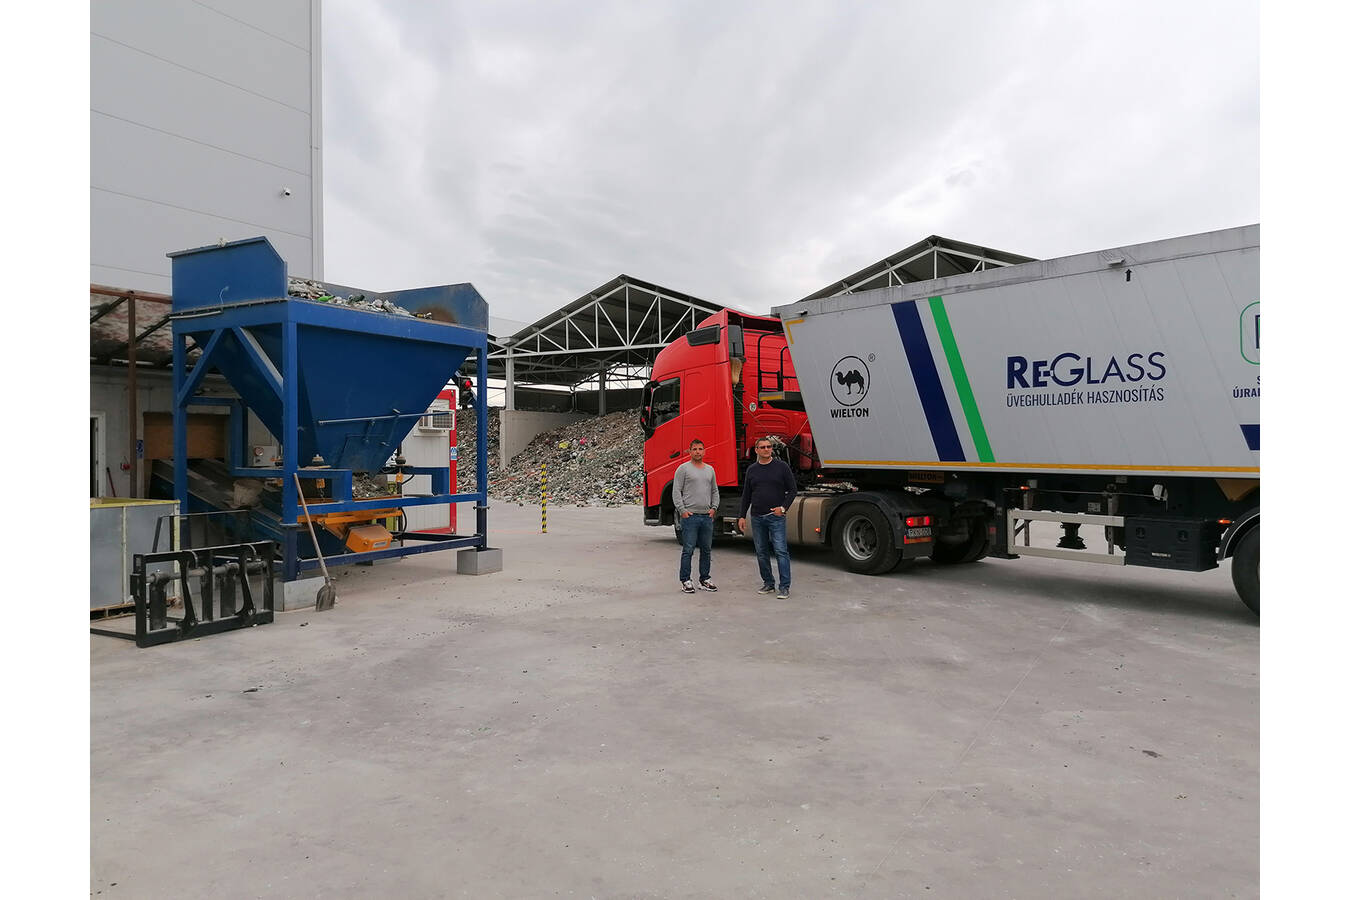 The approximately 3,500-square-meter paved area at RE-Glass provides enough space to meet the challenges of Hungary’s glass recycling industry 